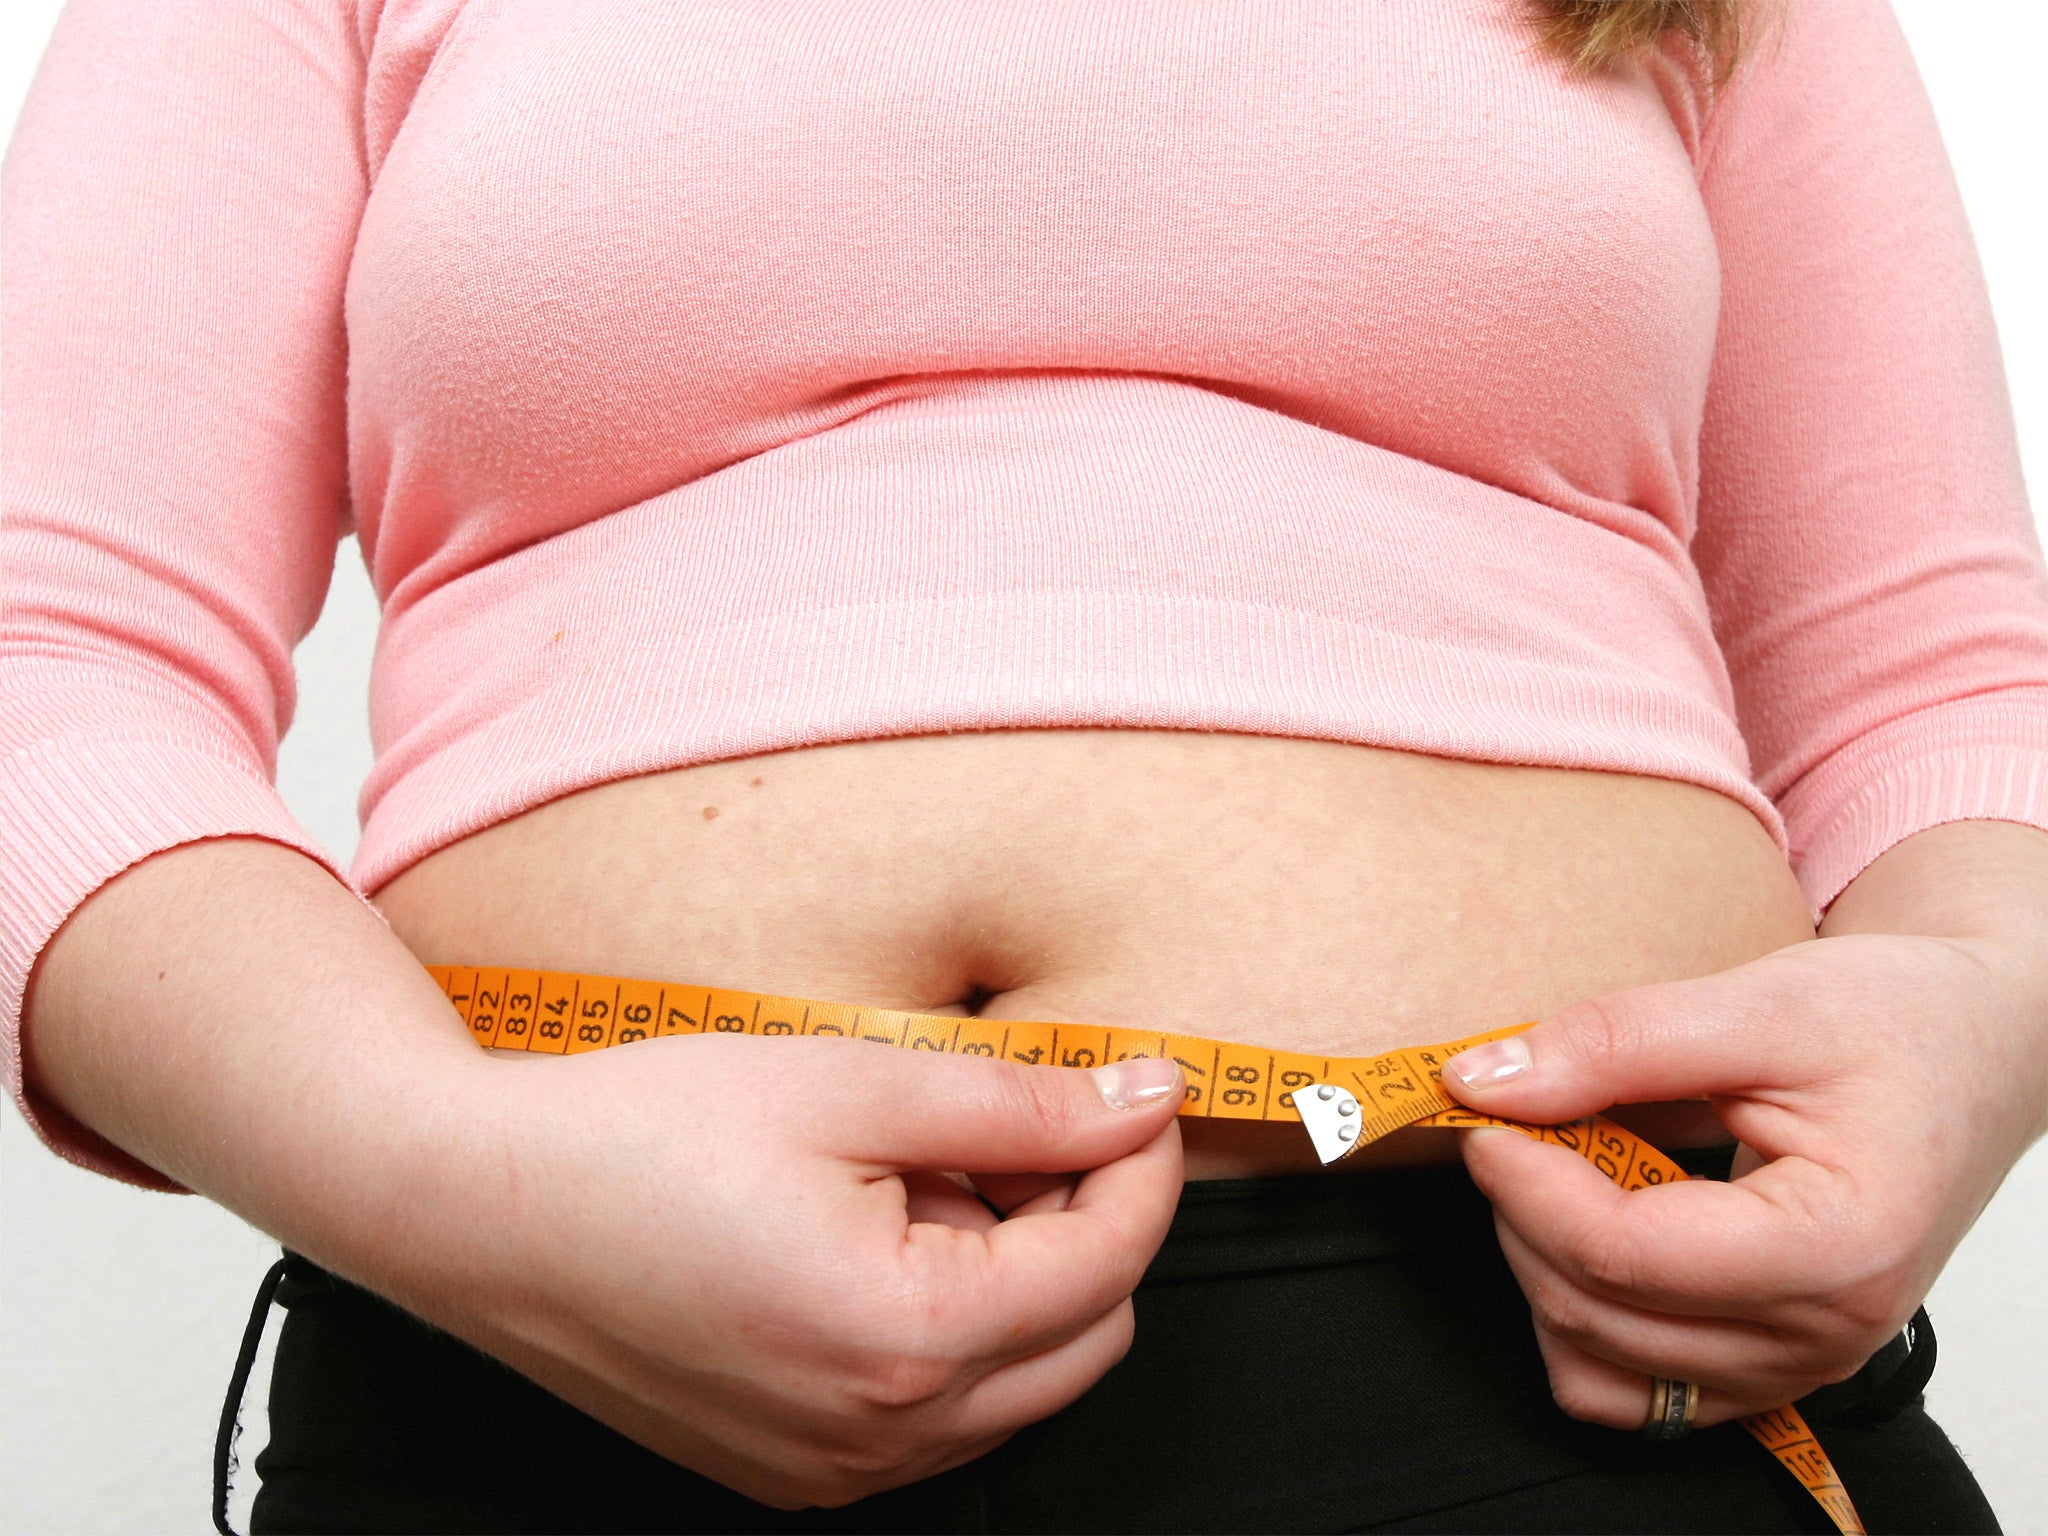 Mild obesity brings a 5 per cent lower premature death rate, according to the study